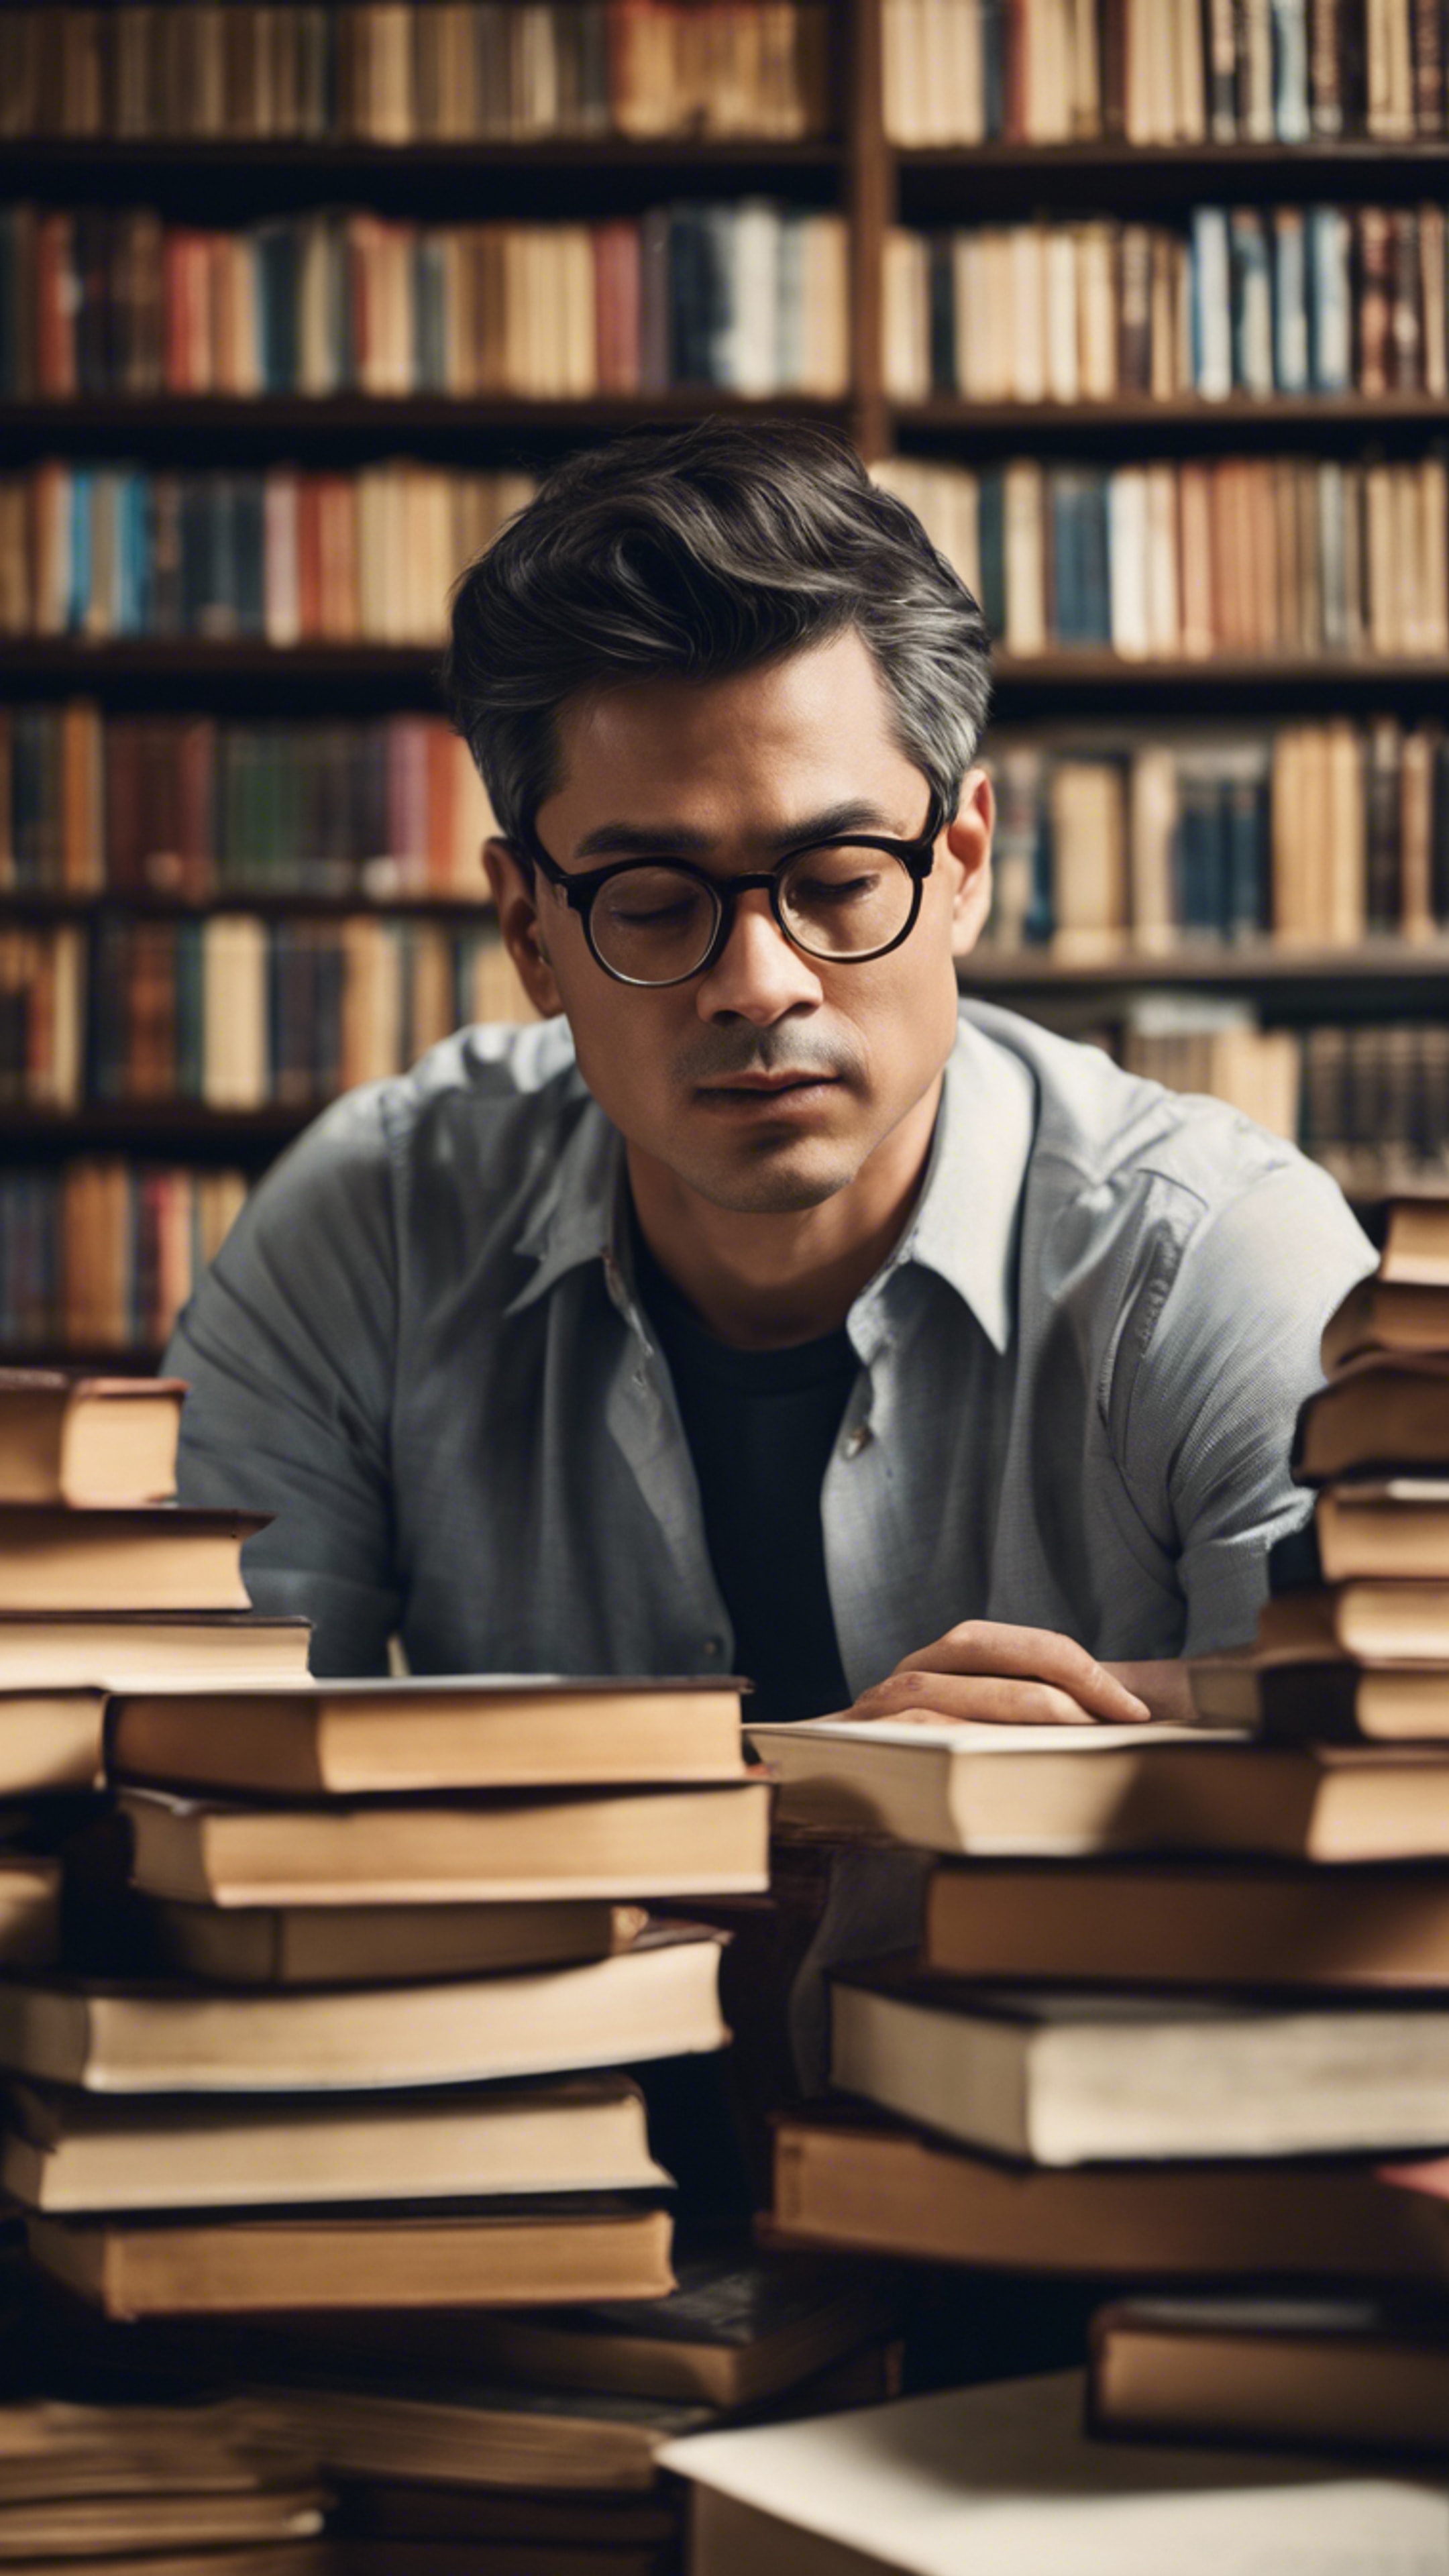 An intelligent man in glasses, deeply engrossed in his studies surrounded by stacks of books in a quiet library. Tapéta[88f4531613da45079a41]